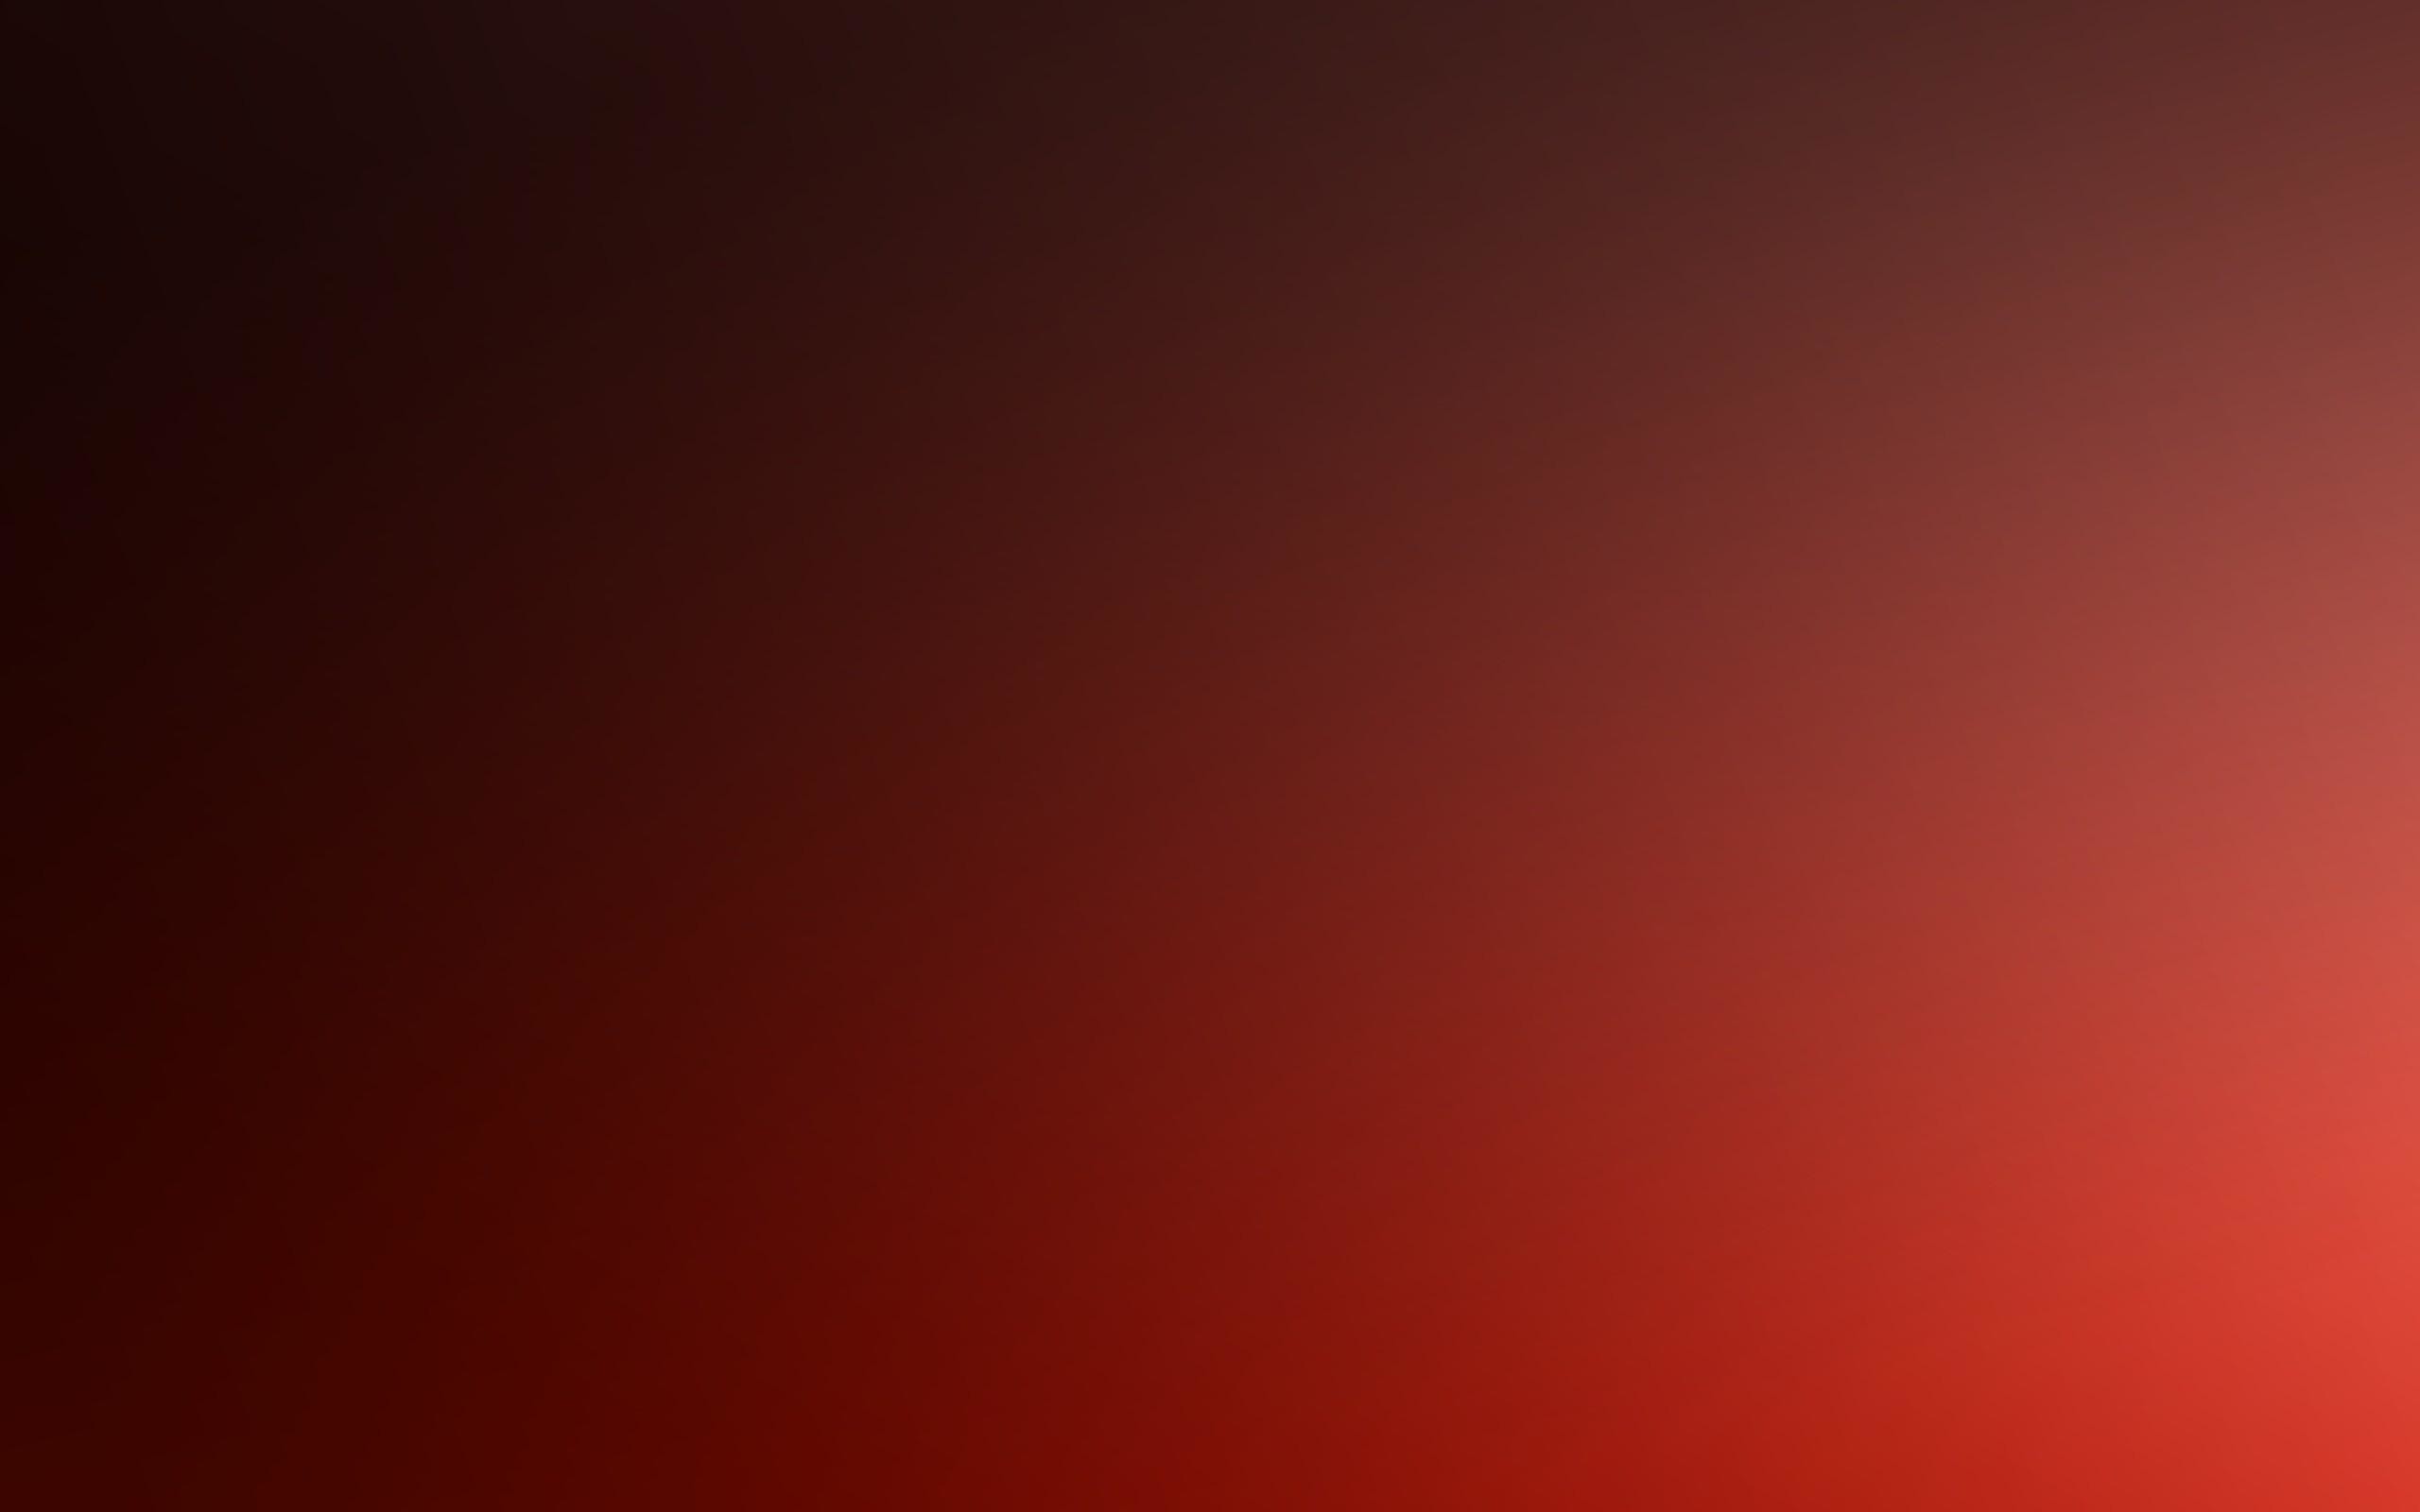 Wallpapers For Dark Red Background Designs